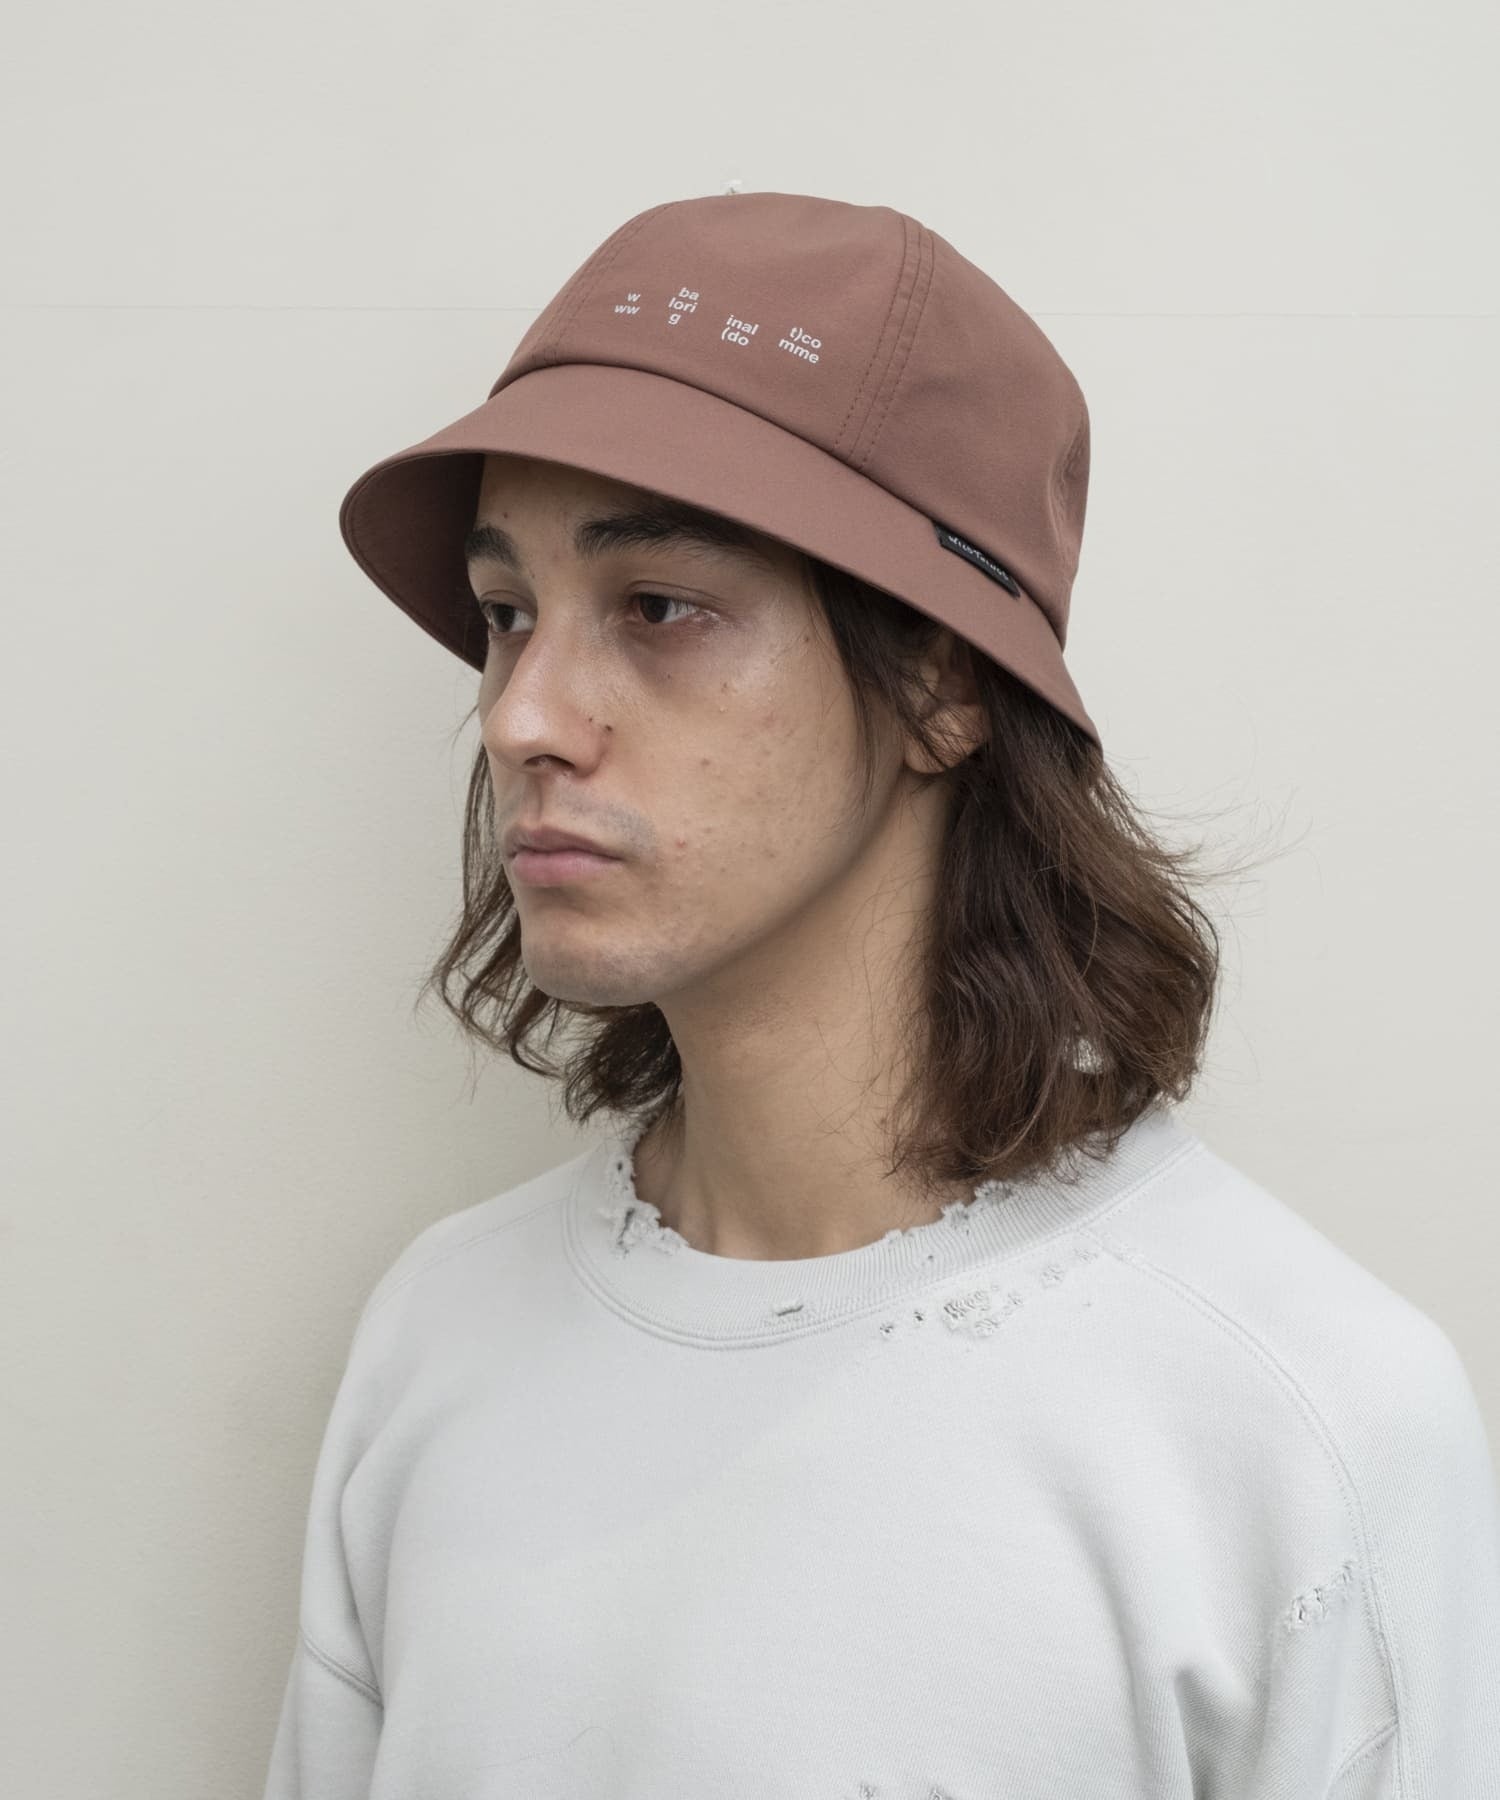 BAL/WILDTHINGS STRETCH BELL HAT (Terracotta)